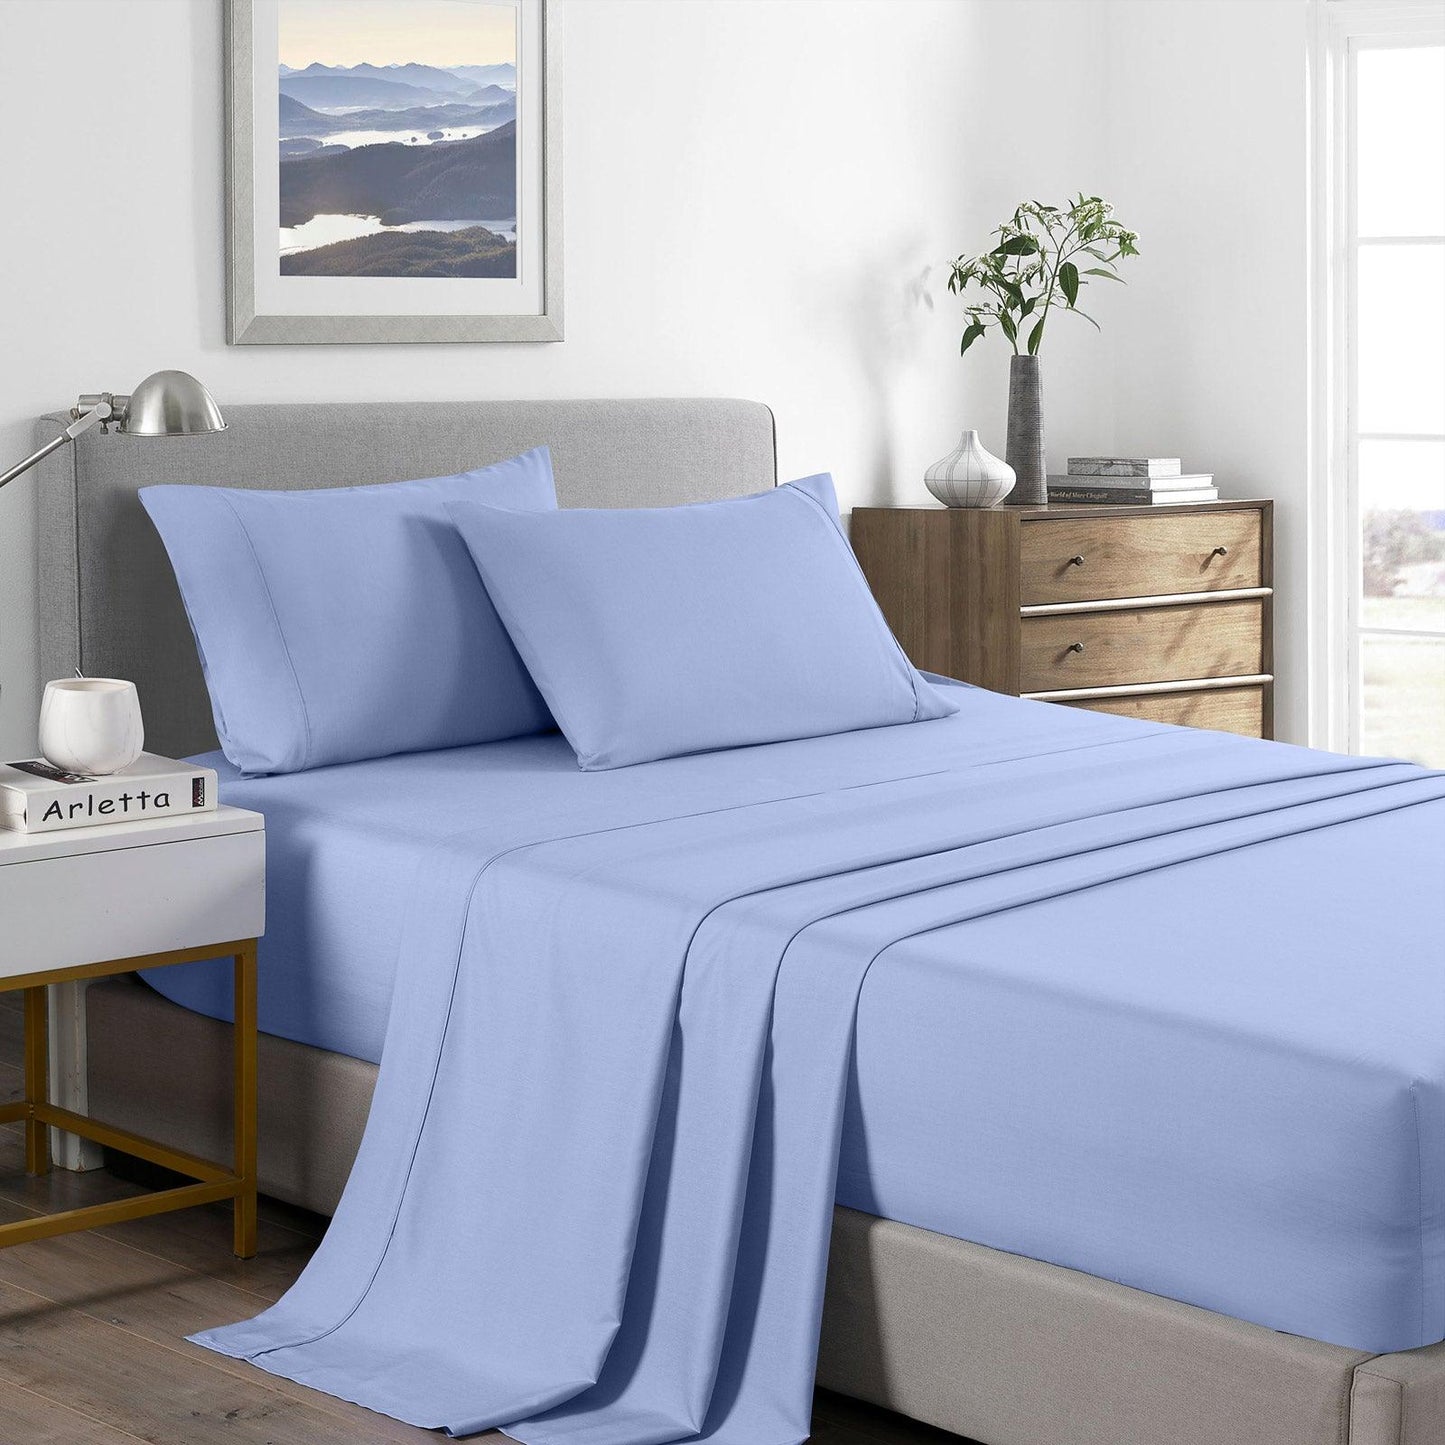 Royal Comfort 2000 Thread Count Bamboo Cooling Sheet Set Ultra Soft Bedding - Double - Light Blue